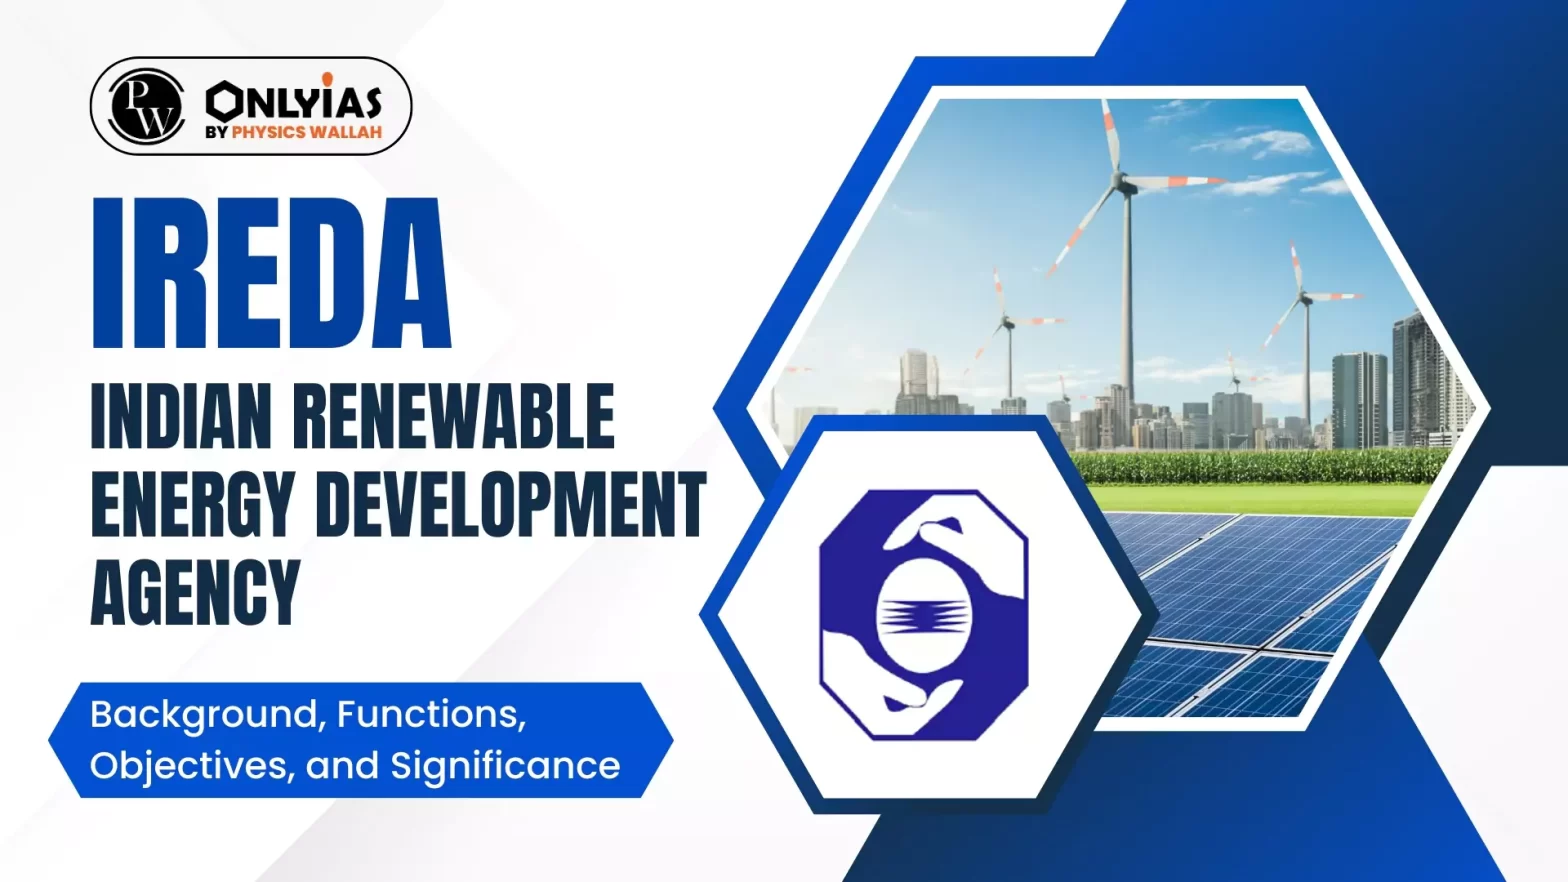 IREDA: Indian Renewable Energy Development Agency – Background, Functions, Objectives, and Significance